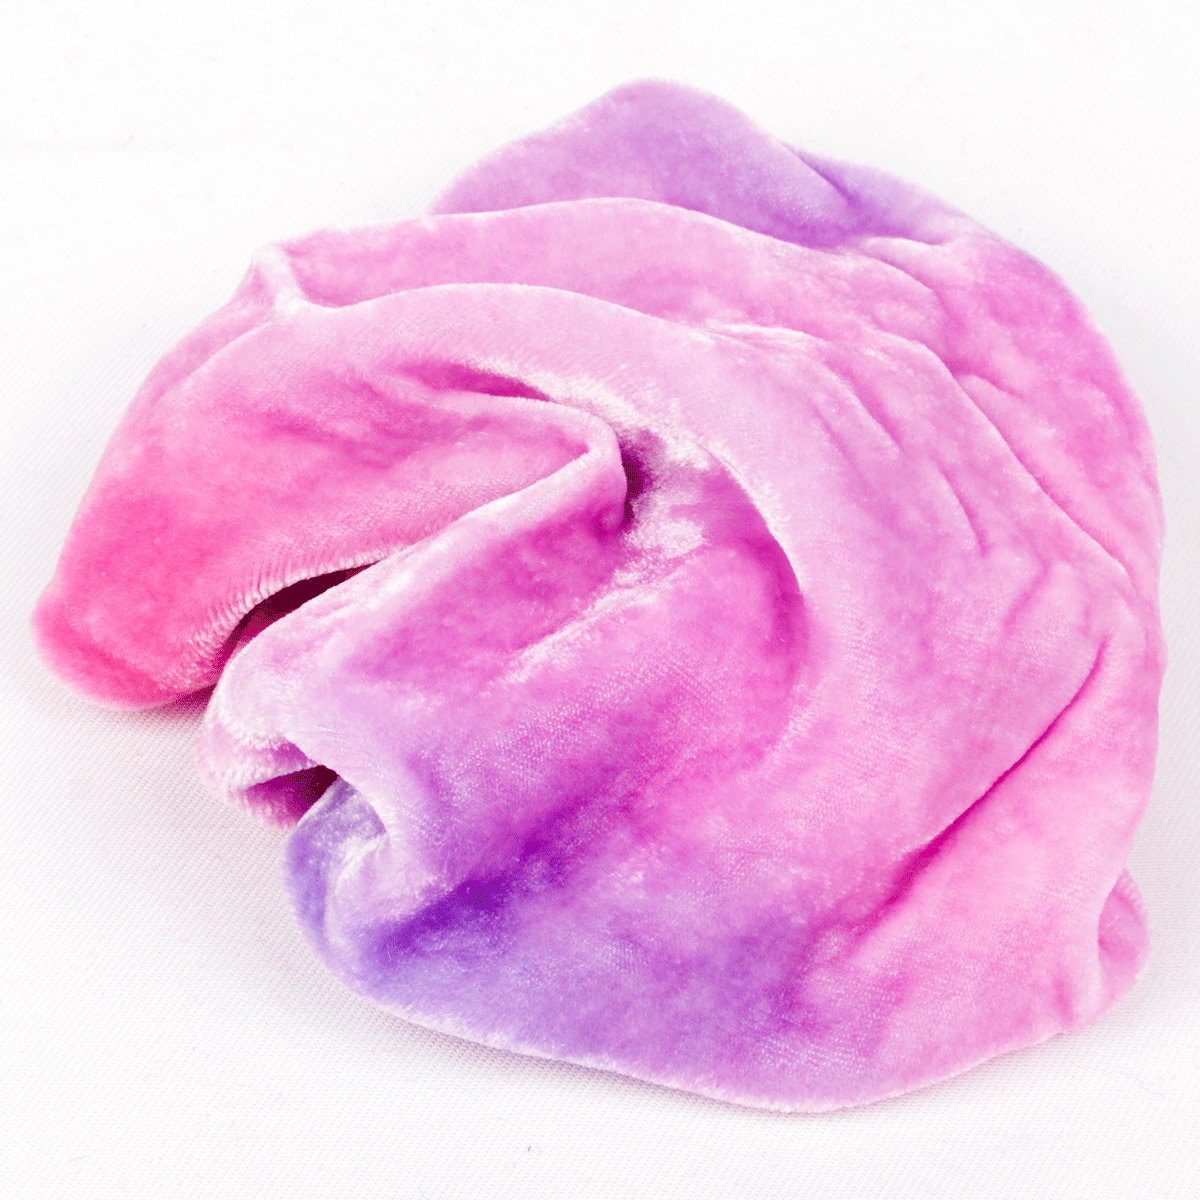 www.colourstreams.com.au Colour Streams Hand Dyed Silk Rayon Velvet Musk Rose 3 Hand Dyed Painted Textile Arts Fibre Embroidery Slow Stitching Meditative Australia